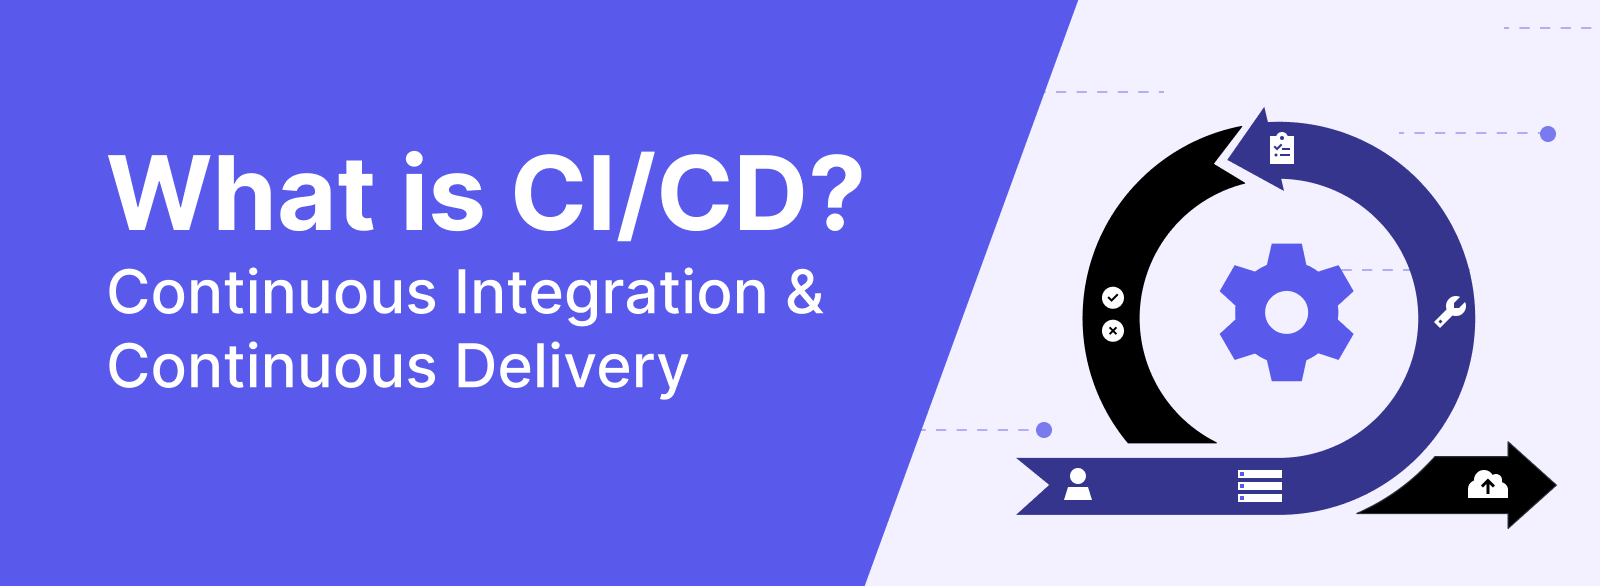 What is CI/CD? Continuous Integration & Continuous Delivery